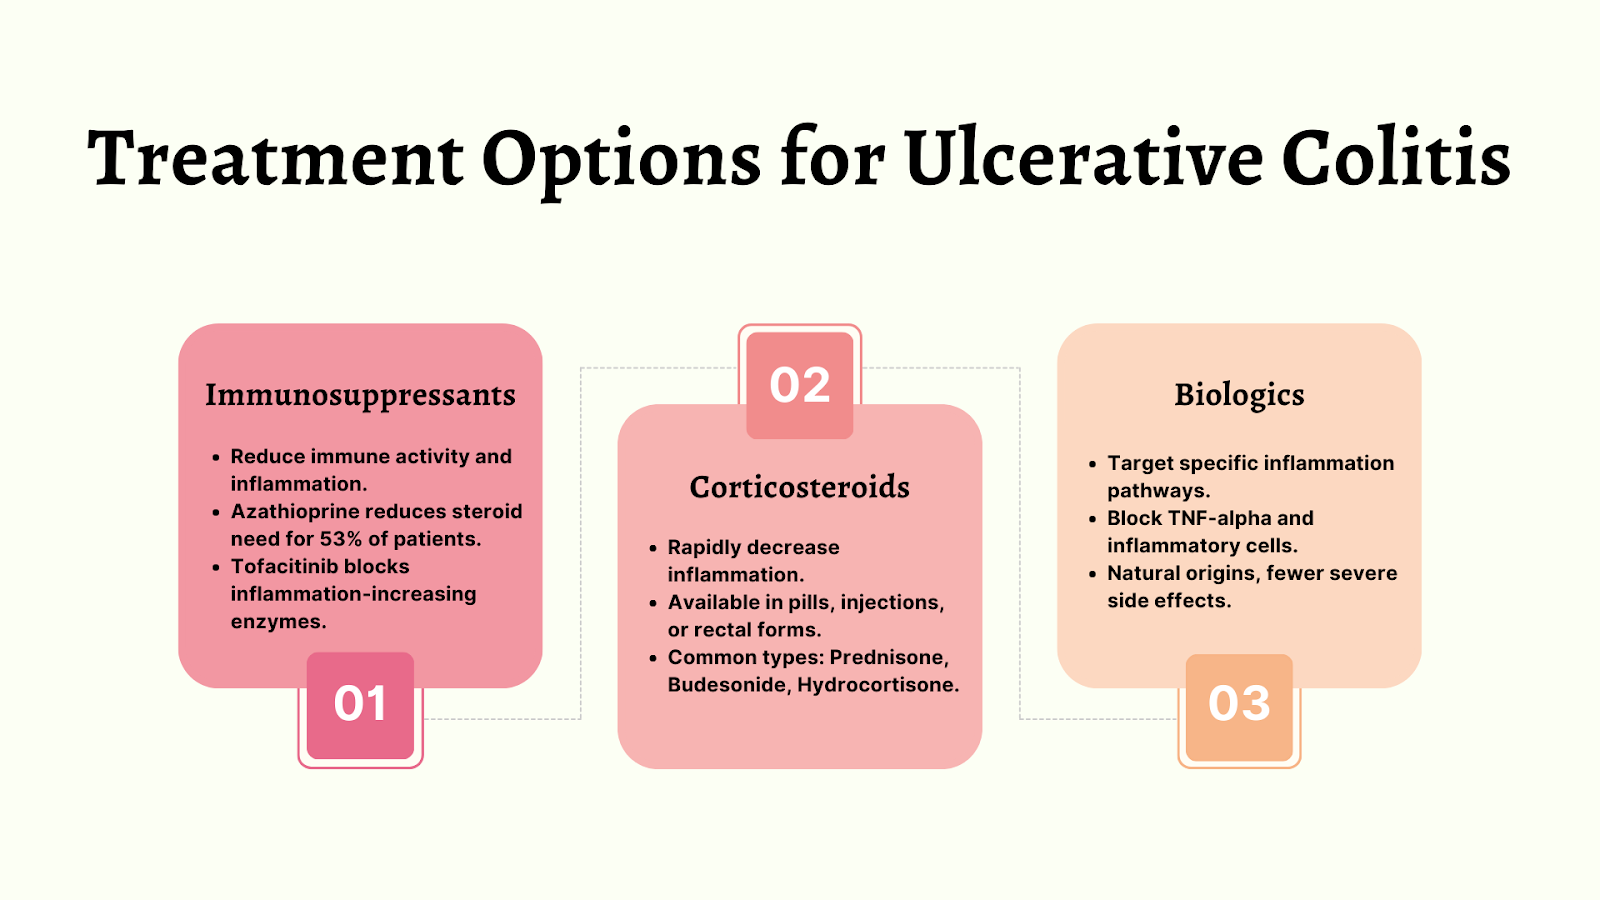 Treatment Options for Ulcerative Colitis